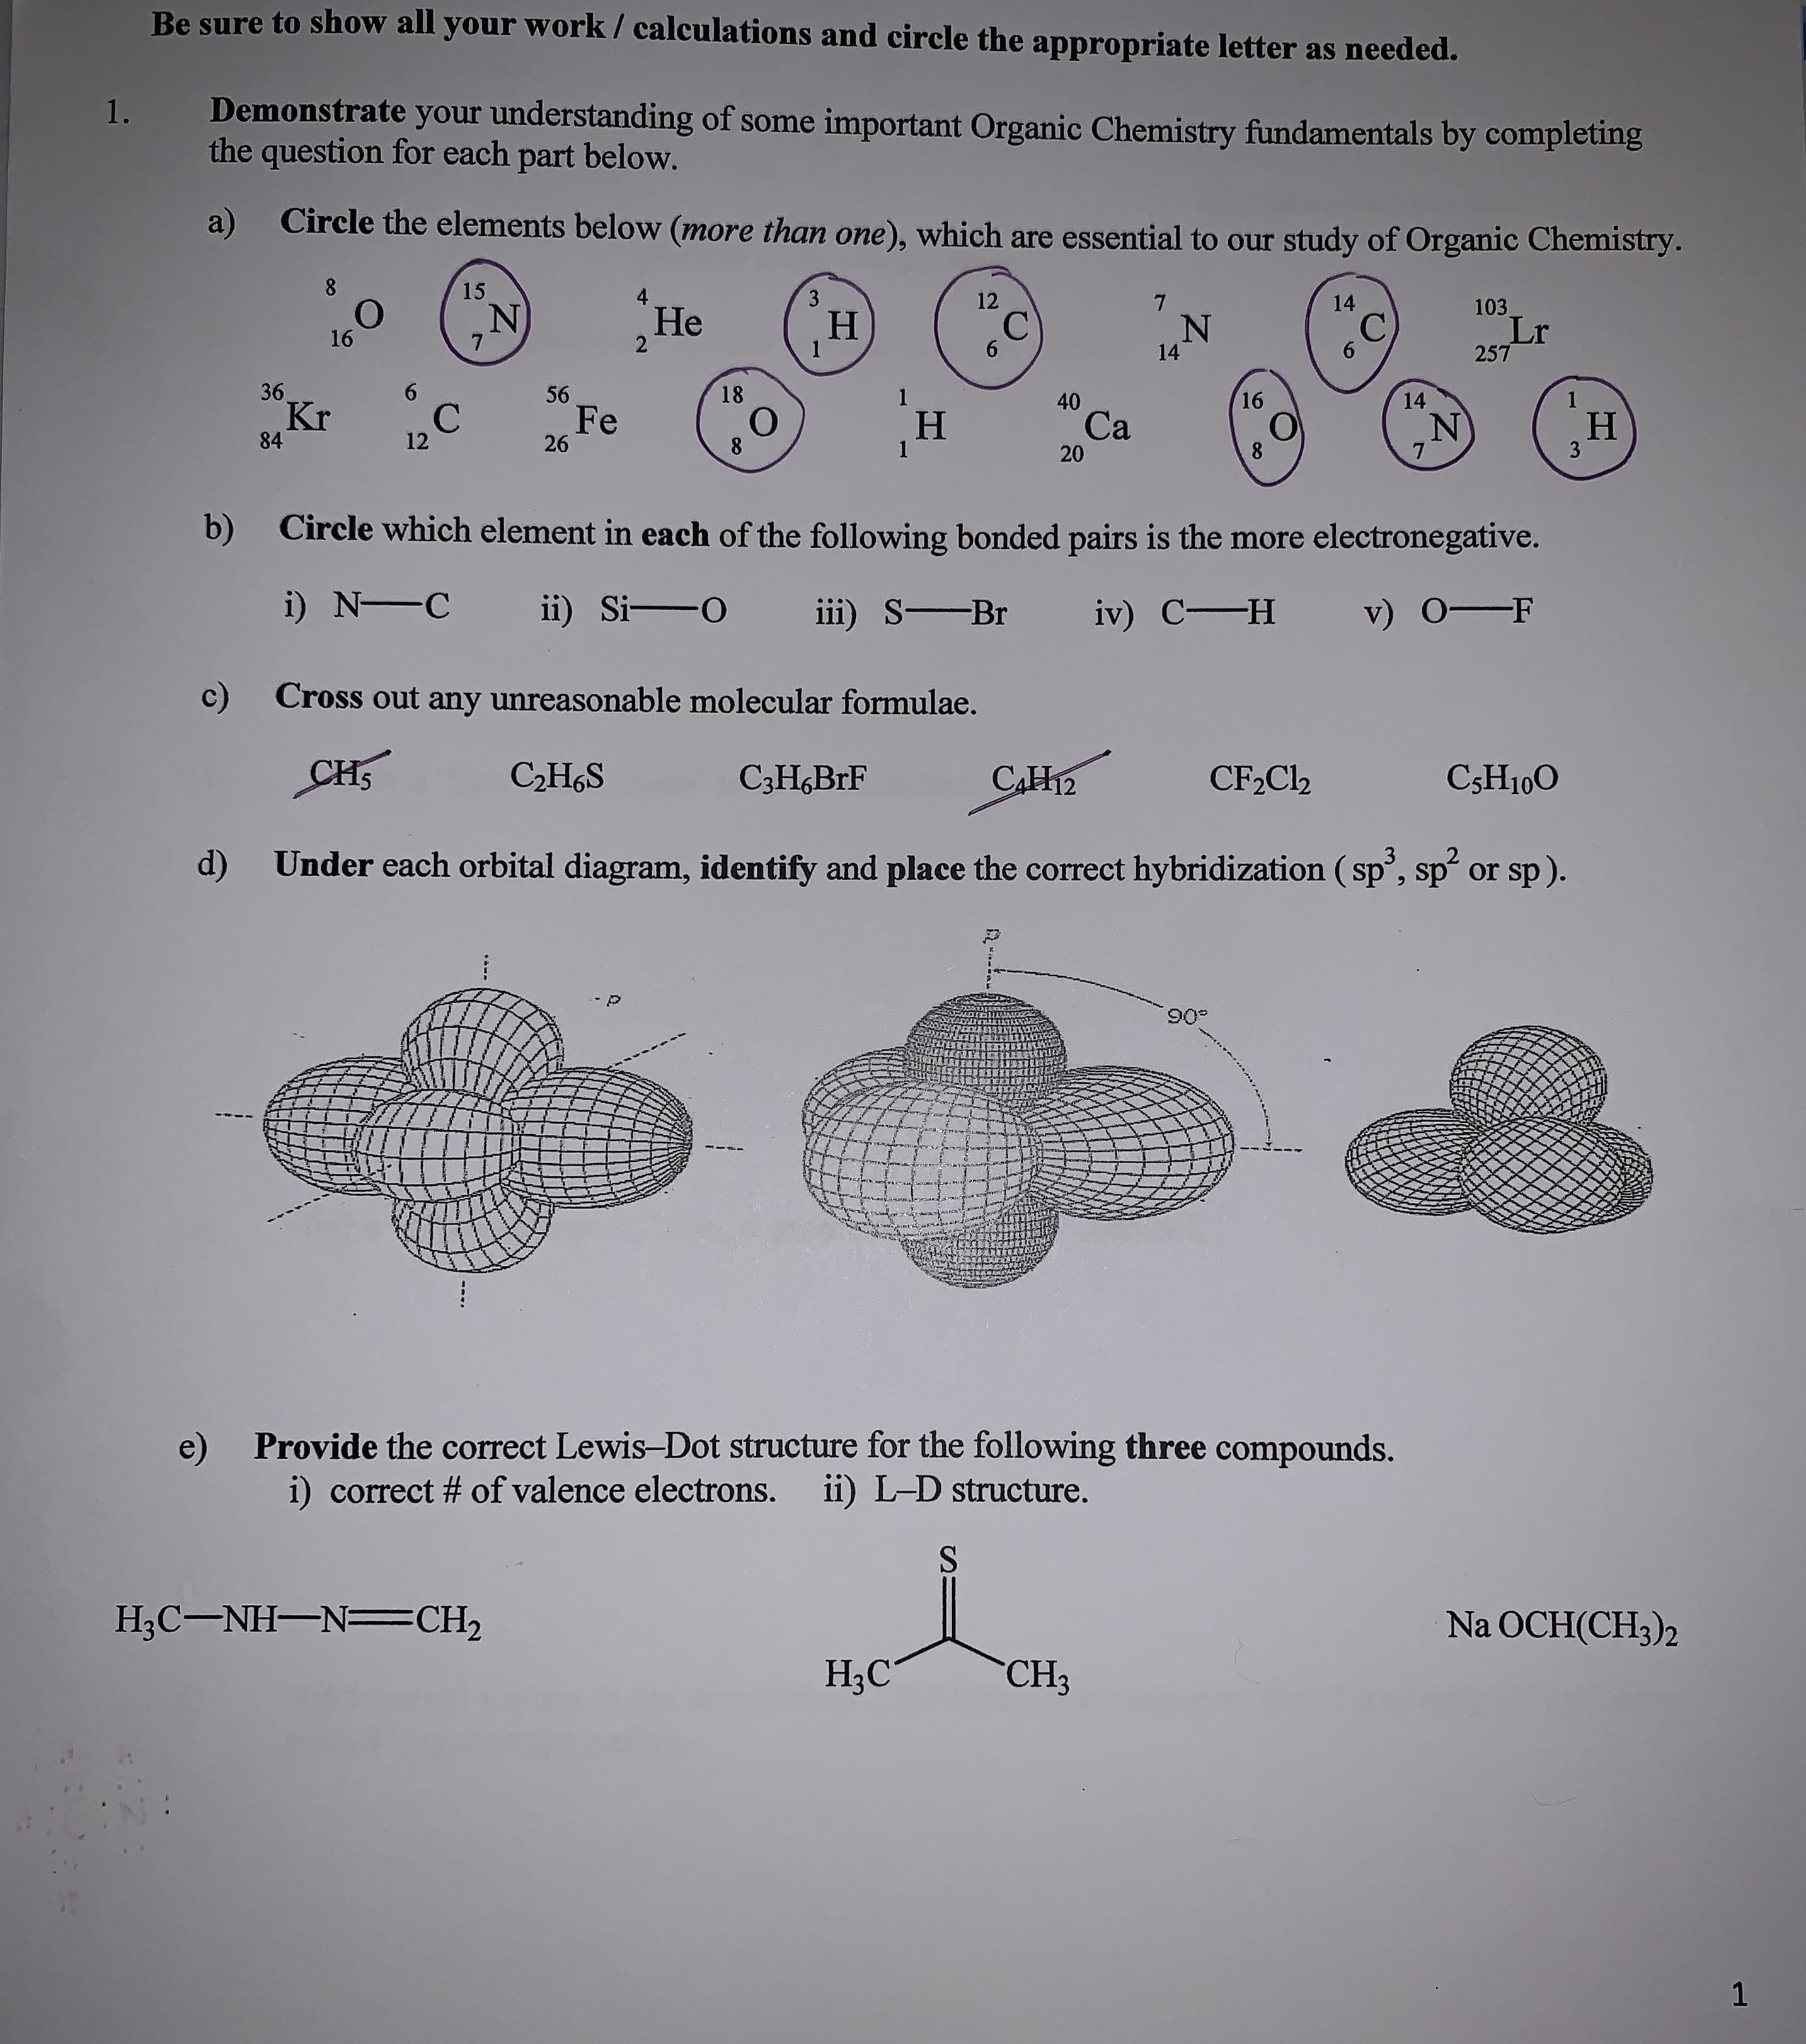 Be sure to show all your work/ calculations and circle the appropriate letter as needed.
Demonstrate your understanding of some important Organic Chemistry fundamentals by completing
question for each part below.
1.
the
Circle the elements below (more than one), which are essential to our study of Organic Chemistry.
a)
8
15
4
3
12
7
14
103
Не
2
С
6
Н
1
С
6
Lr
257
16
7
14
36.
Kr
6
56
18
1
16
1
40
14
C
12
Fe
26
о
8
H
1
Cа
H
3
84
8
7
20
Circle which element in each of the following bonded pairs is the more electronegative.
b)
i) N C
ii) Si-O
iii) S Br
v) OF
iv) C-H
c)
Cross out any unreasonable molecular formulae.
CHS
САНа
СЭHaS
CF2C12
CsH100
C3H6BrF
Under each orbital diagram, identify and place the correct hybridization (sp, sp or sp).
d)
Provide the correct Lewis-Dot structure for the following three compounds.
i) correct # of valence electrons.
ii) L-D structure.
H3C-NH-N CH2
Na OCH(CH3)2
HаС
CH3
1
